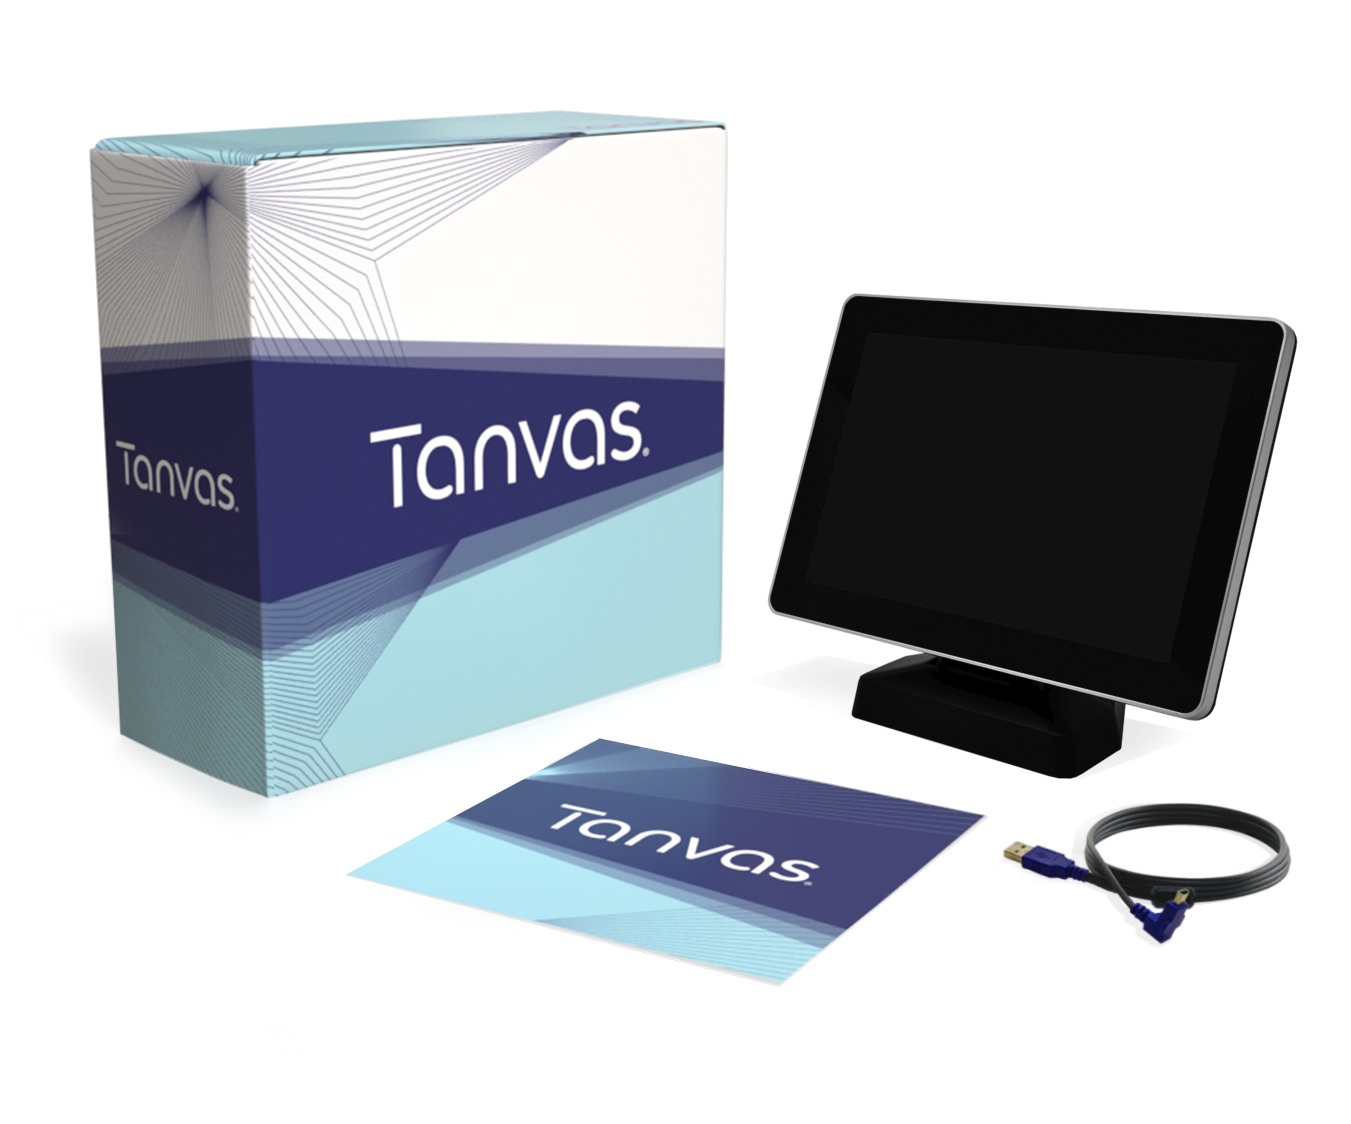 TanvasTouch dev kit box, monitor, cord and cleaning cloth